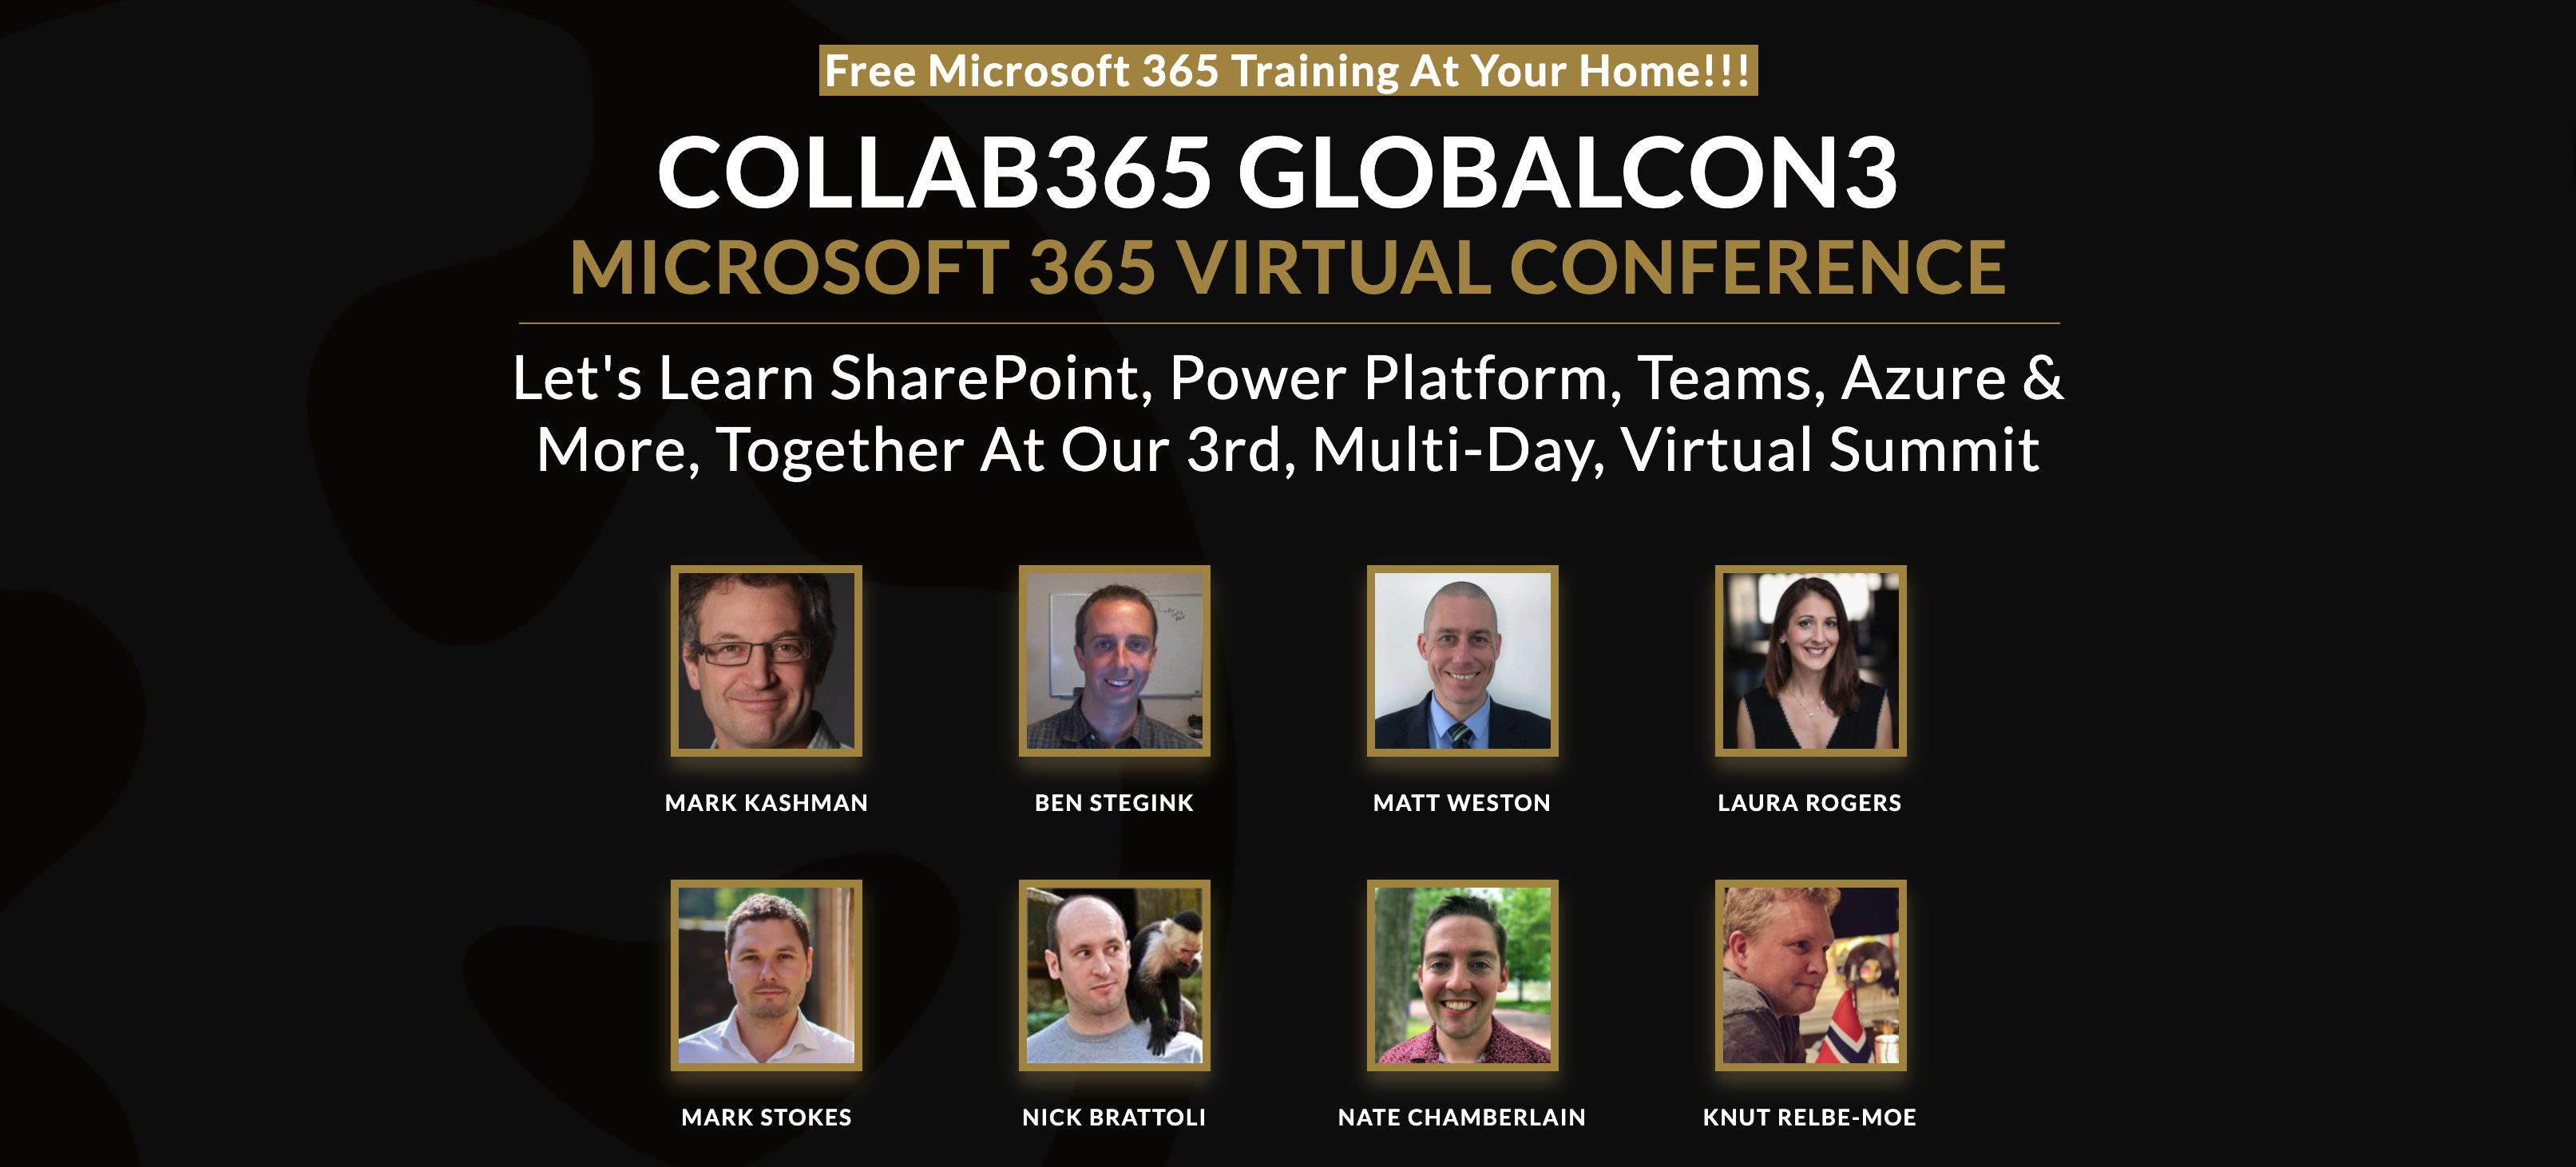 Speaking at Collab365 GlobalCon3 2020